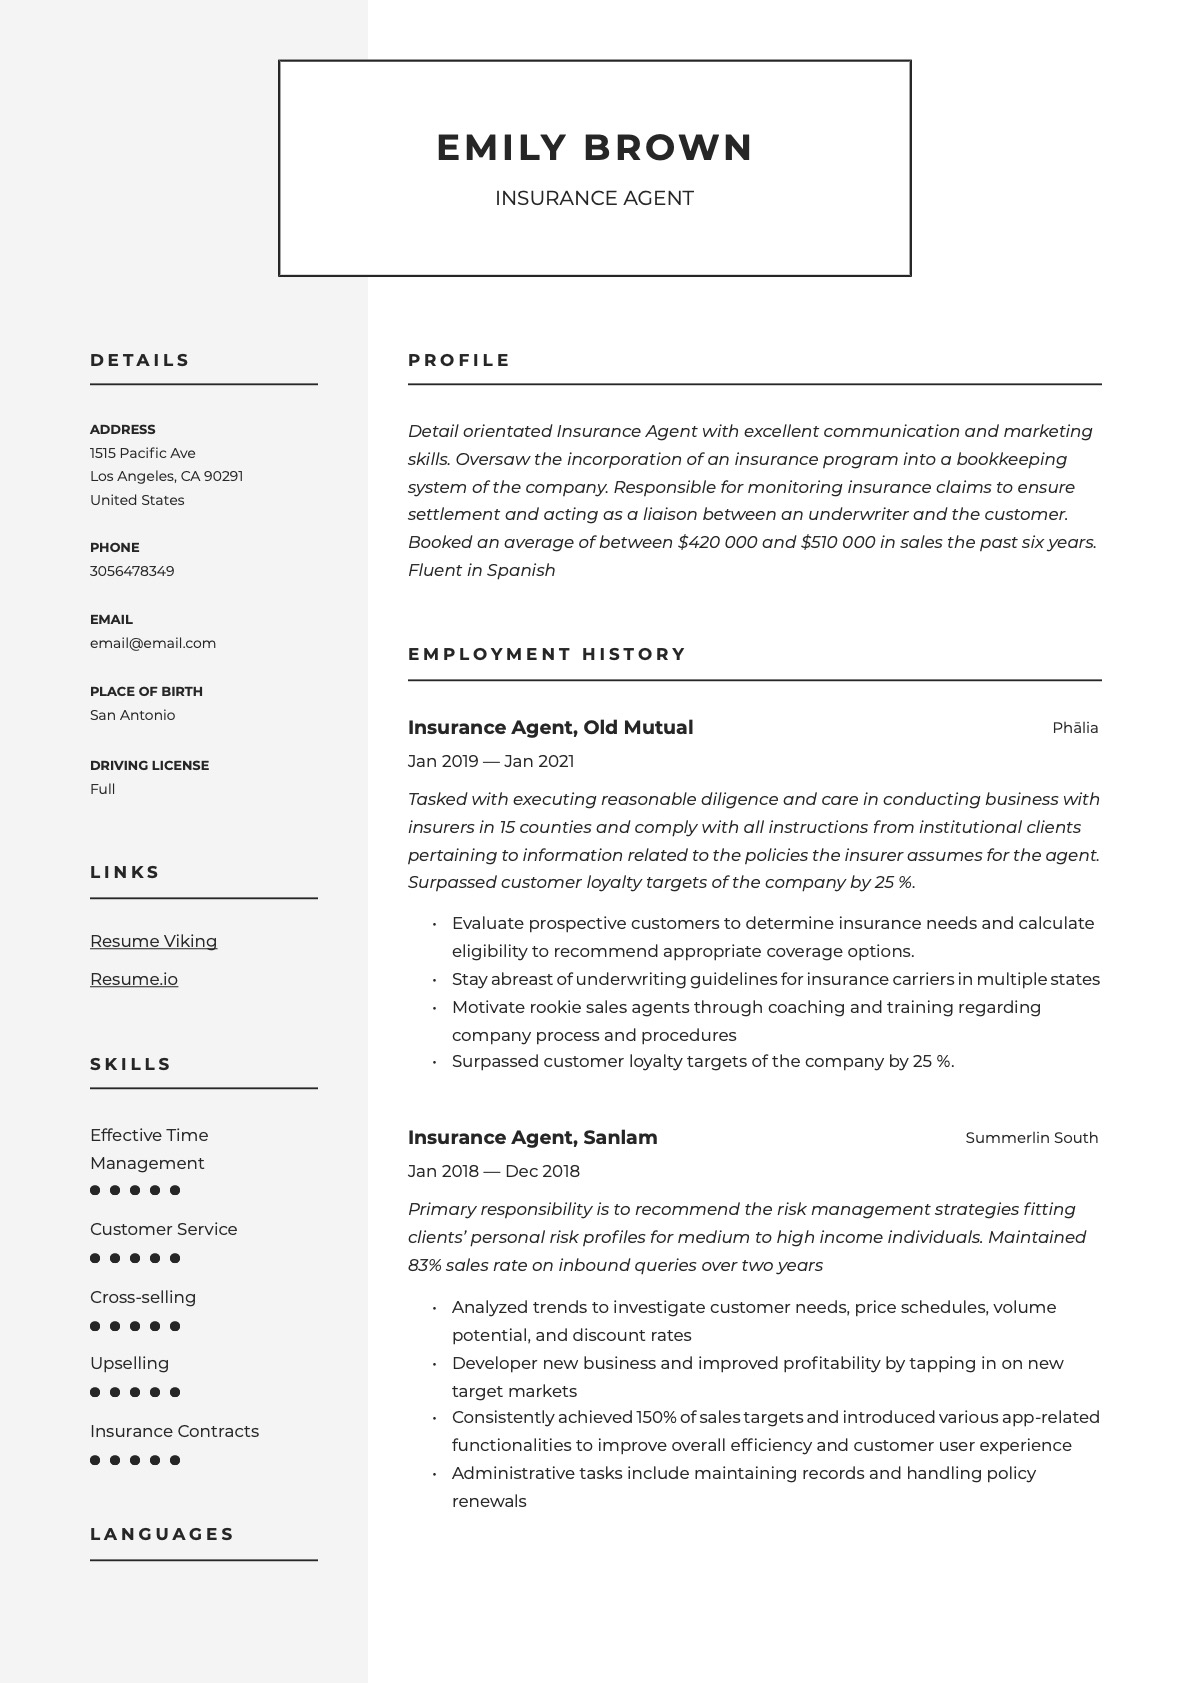 Example resume insurance agent-8